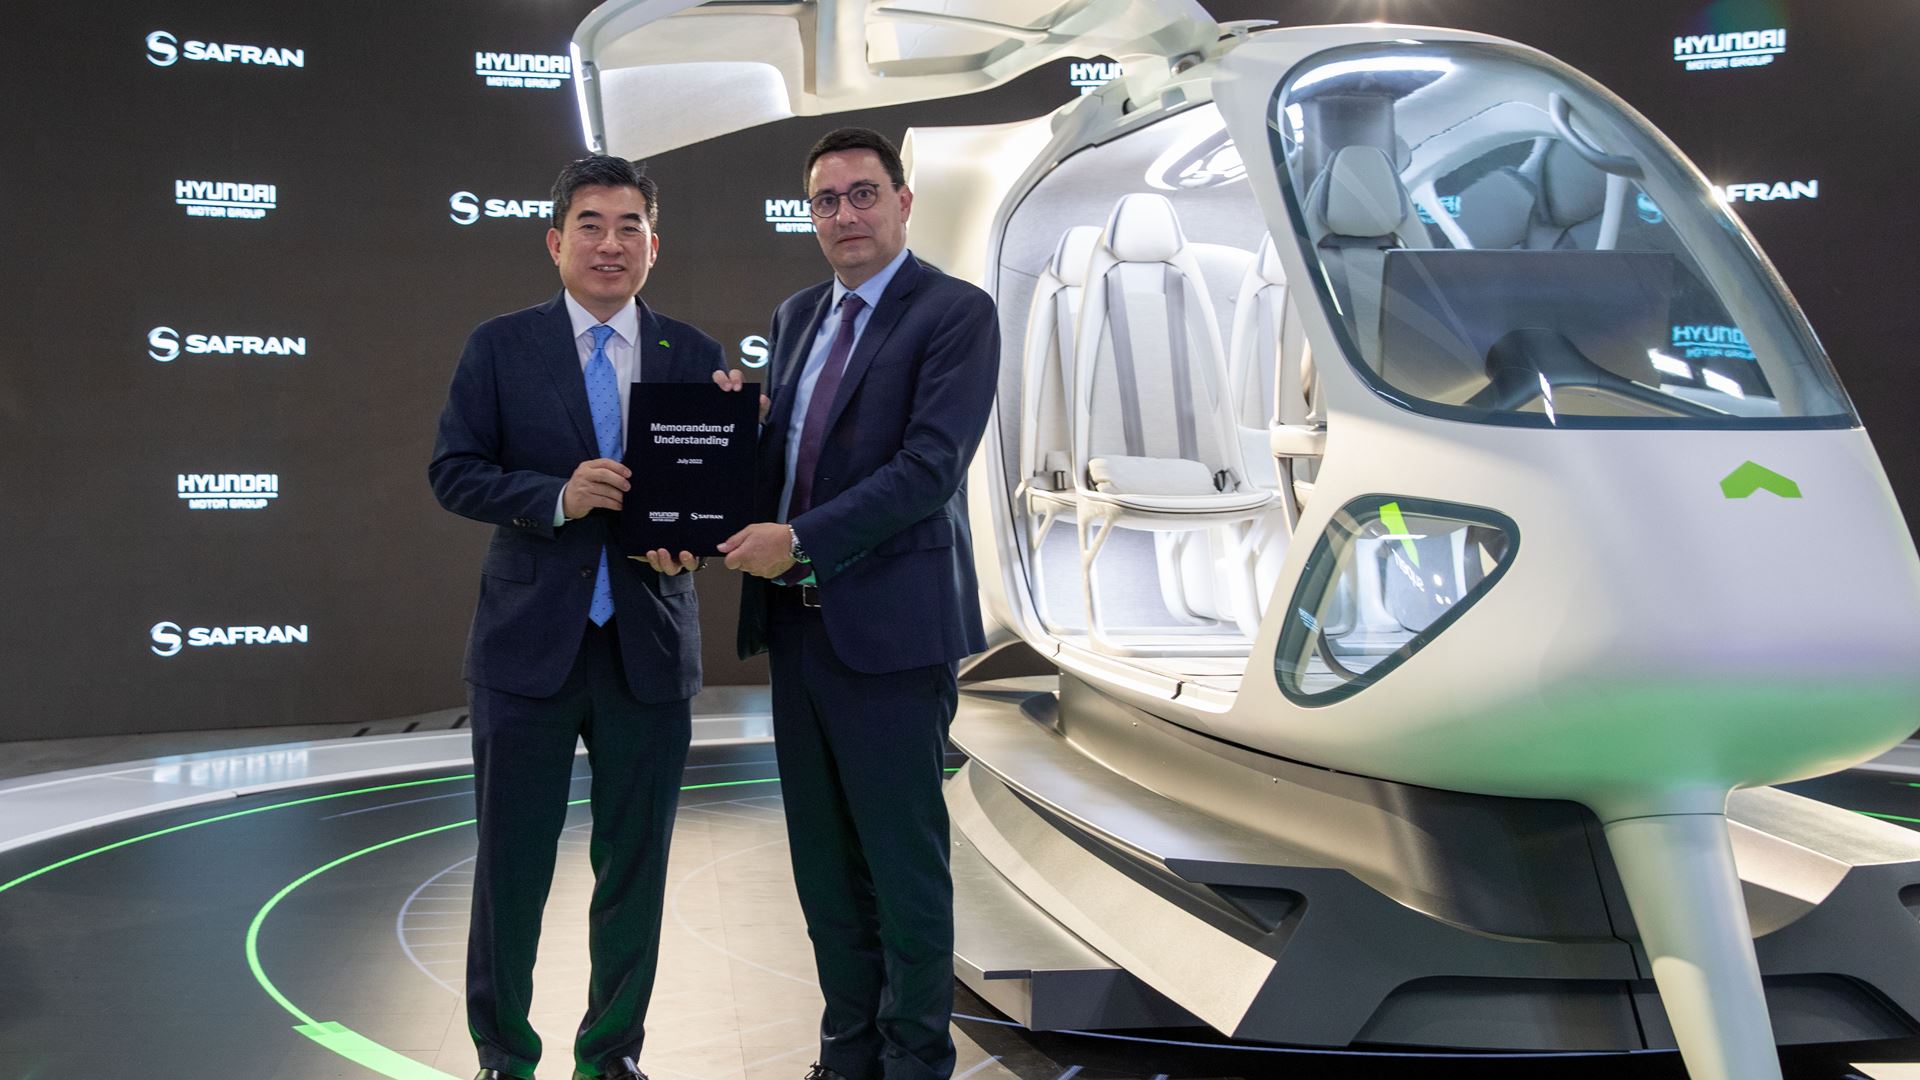 Hyundai Motor Group and Safran Signed a Memorandum of Understanding for Advanced Air Mobility Development Cooperation